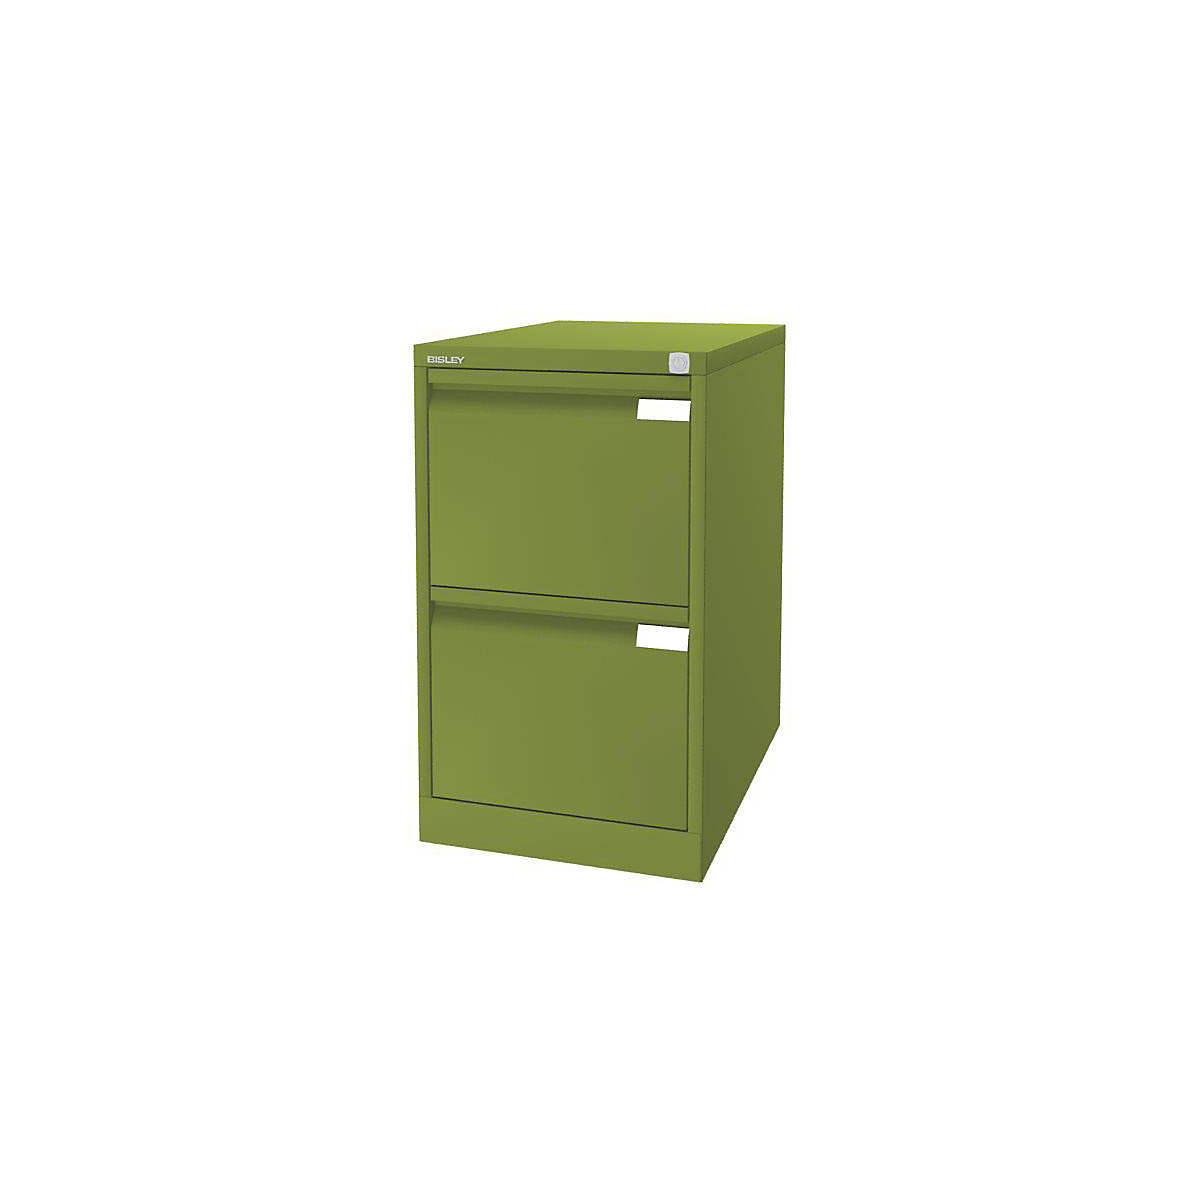 Suspension file cabinet, 1-track – BISLEY, 2 A4 drawers, green-9